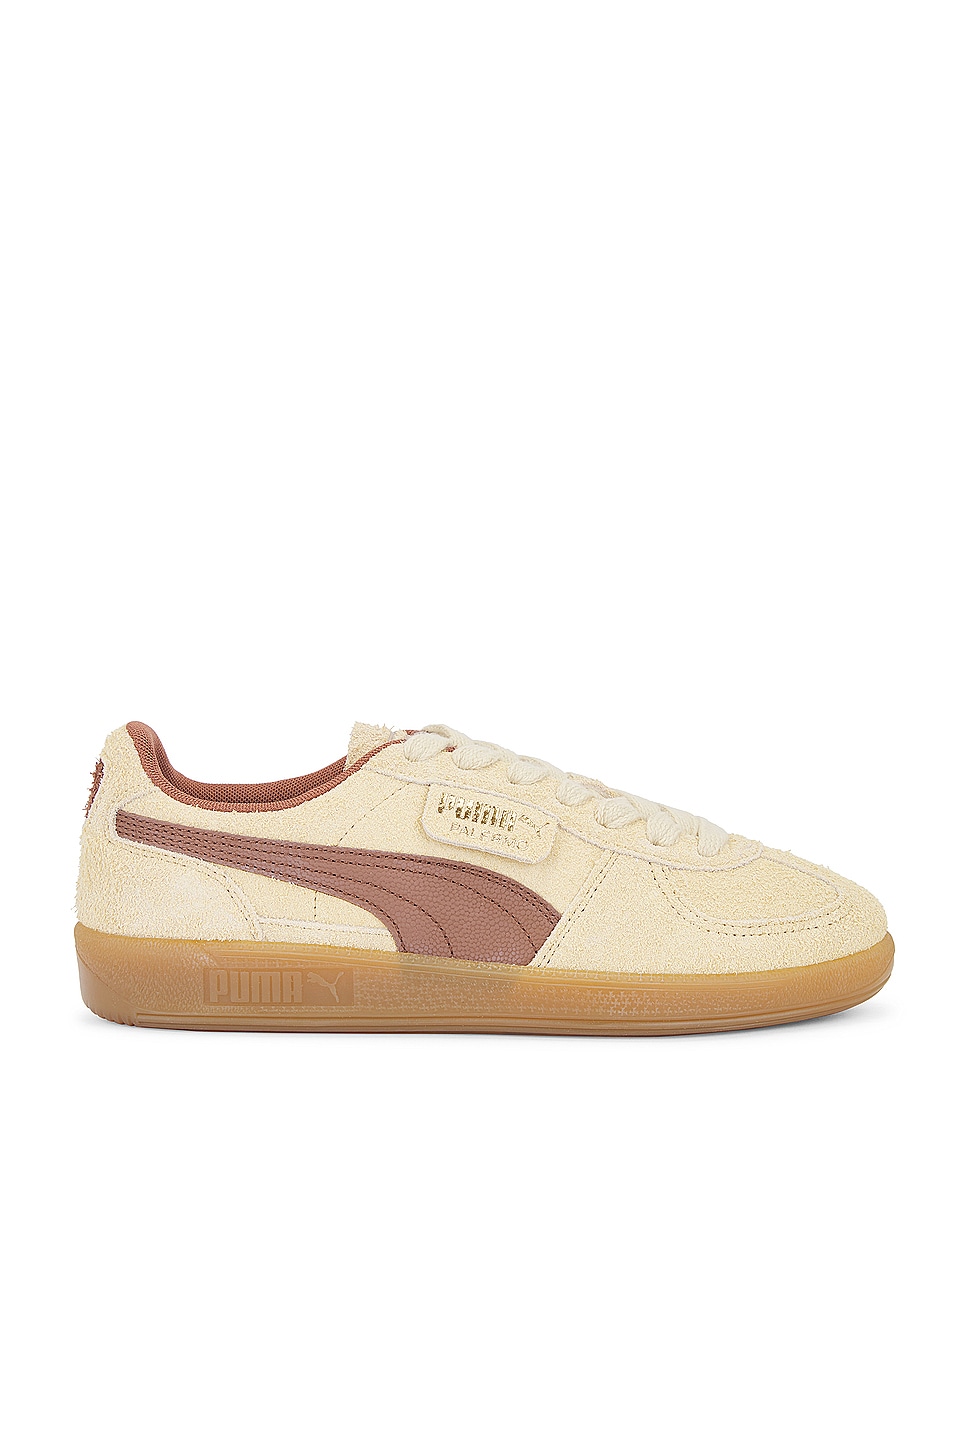 Image 1 of Puma Select Palermo Hairy in Khaki